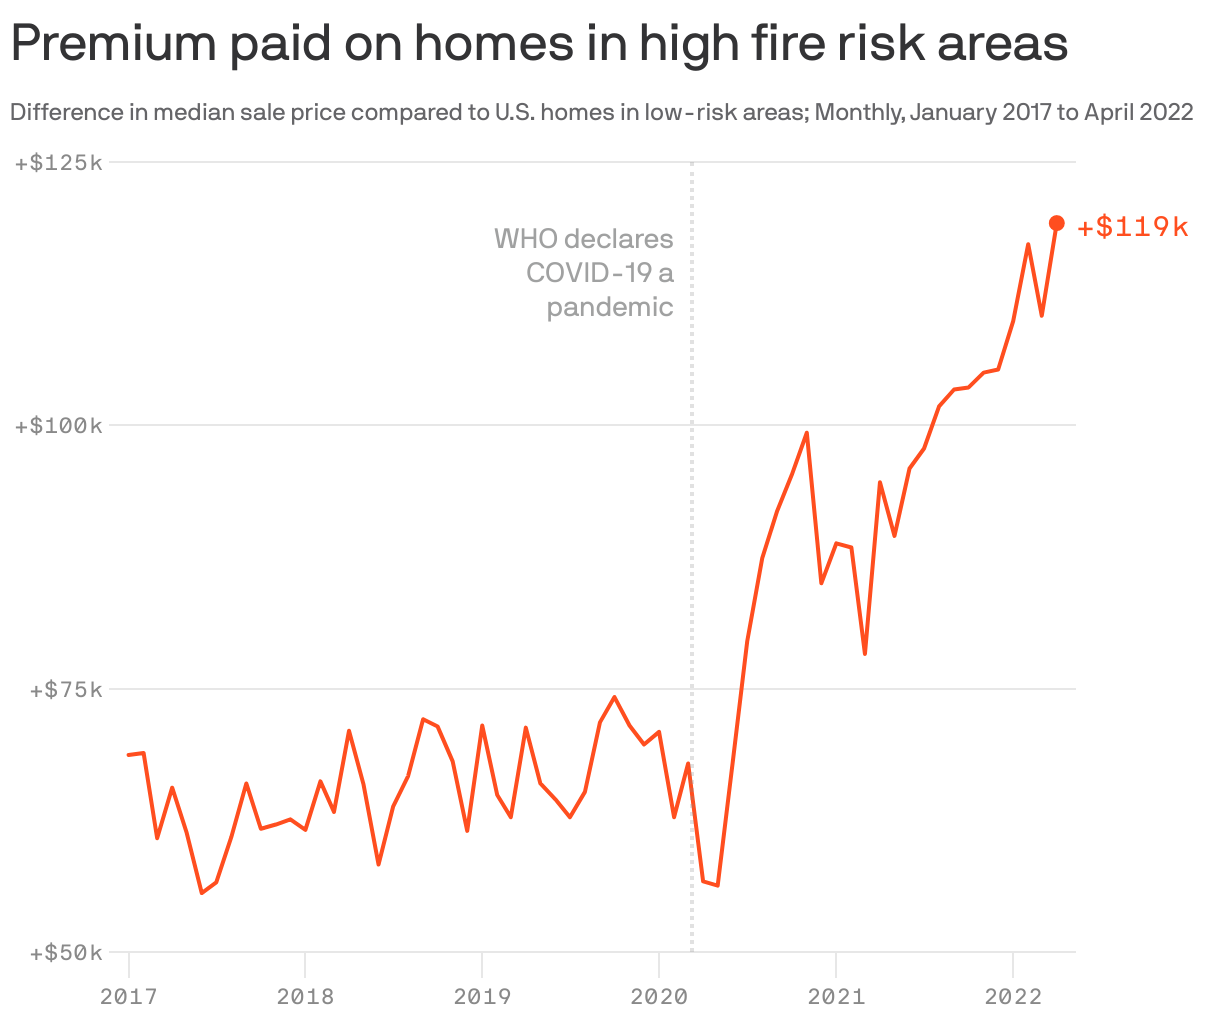 Premium paid on homes in high fire risk areas